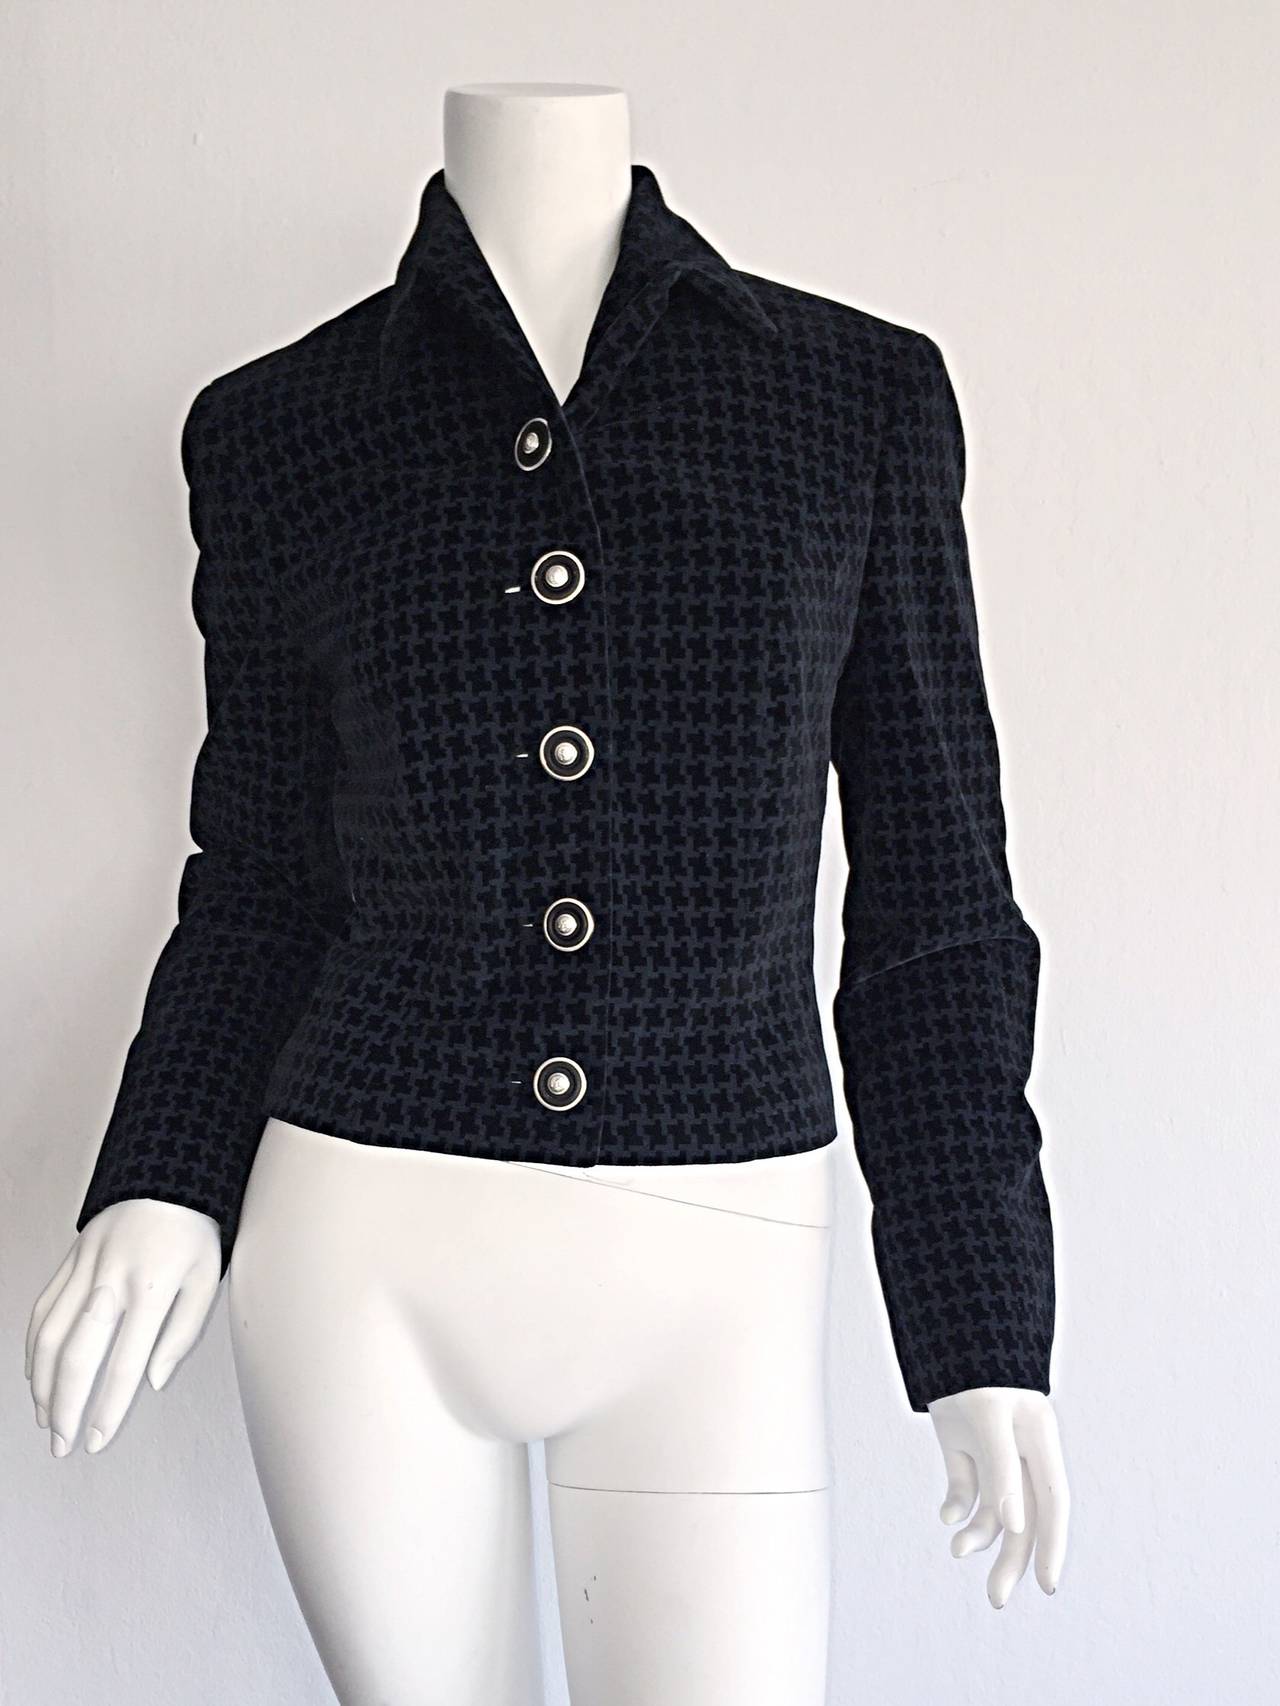 Awesome vintage Gianni Versace 'Versus' Pre-Death slim fitted blazer/jacket! Signature silver + black Medusa buttons up the front, and at cuffs. Perfect transitional piece--can easily be dressed up or down. Made in Italy.  Fully lined. In great